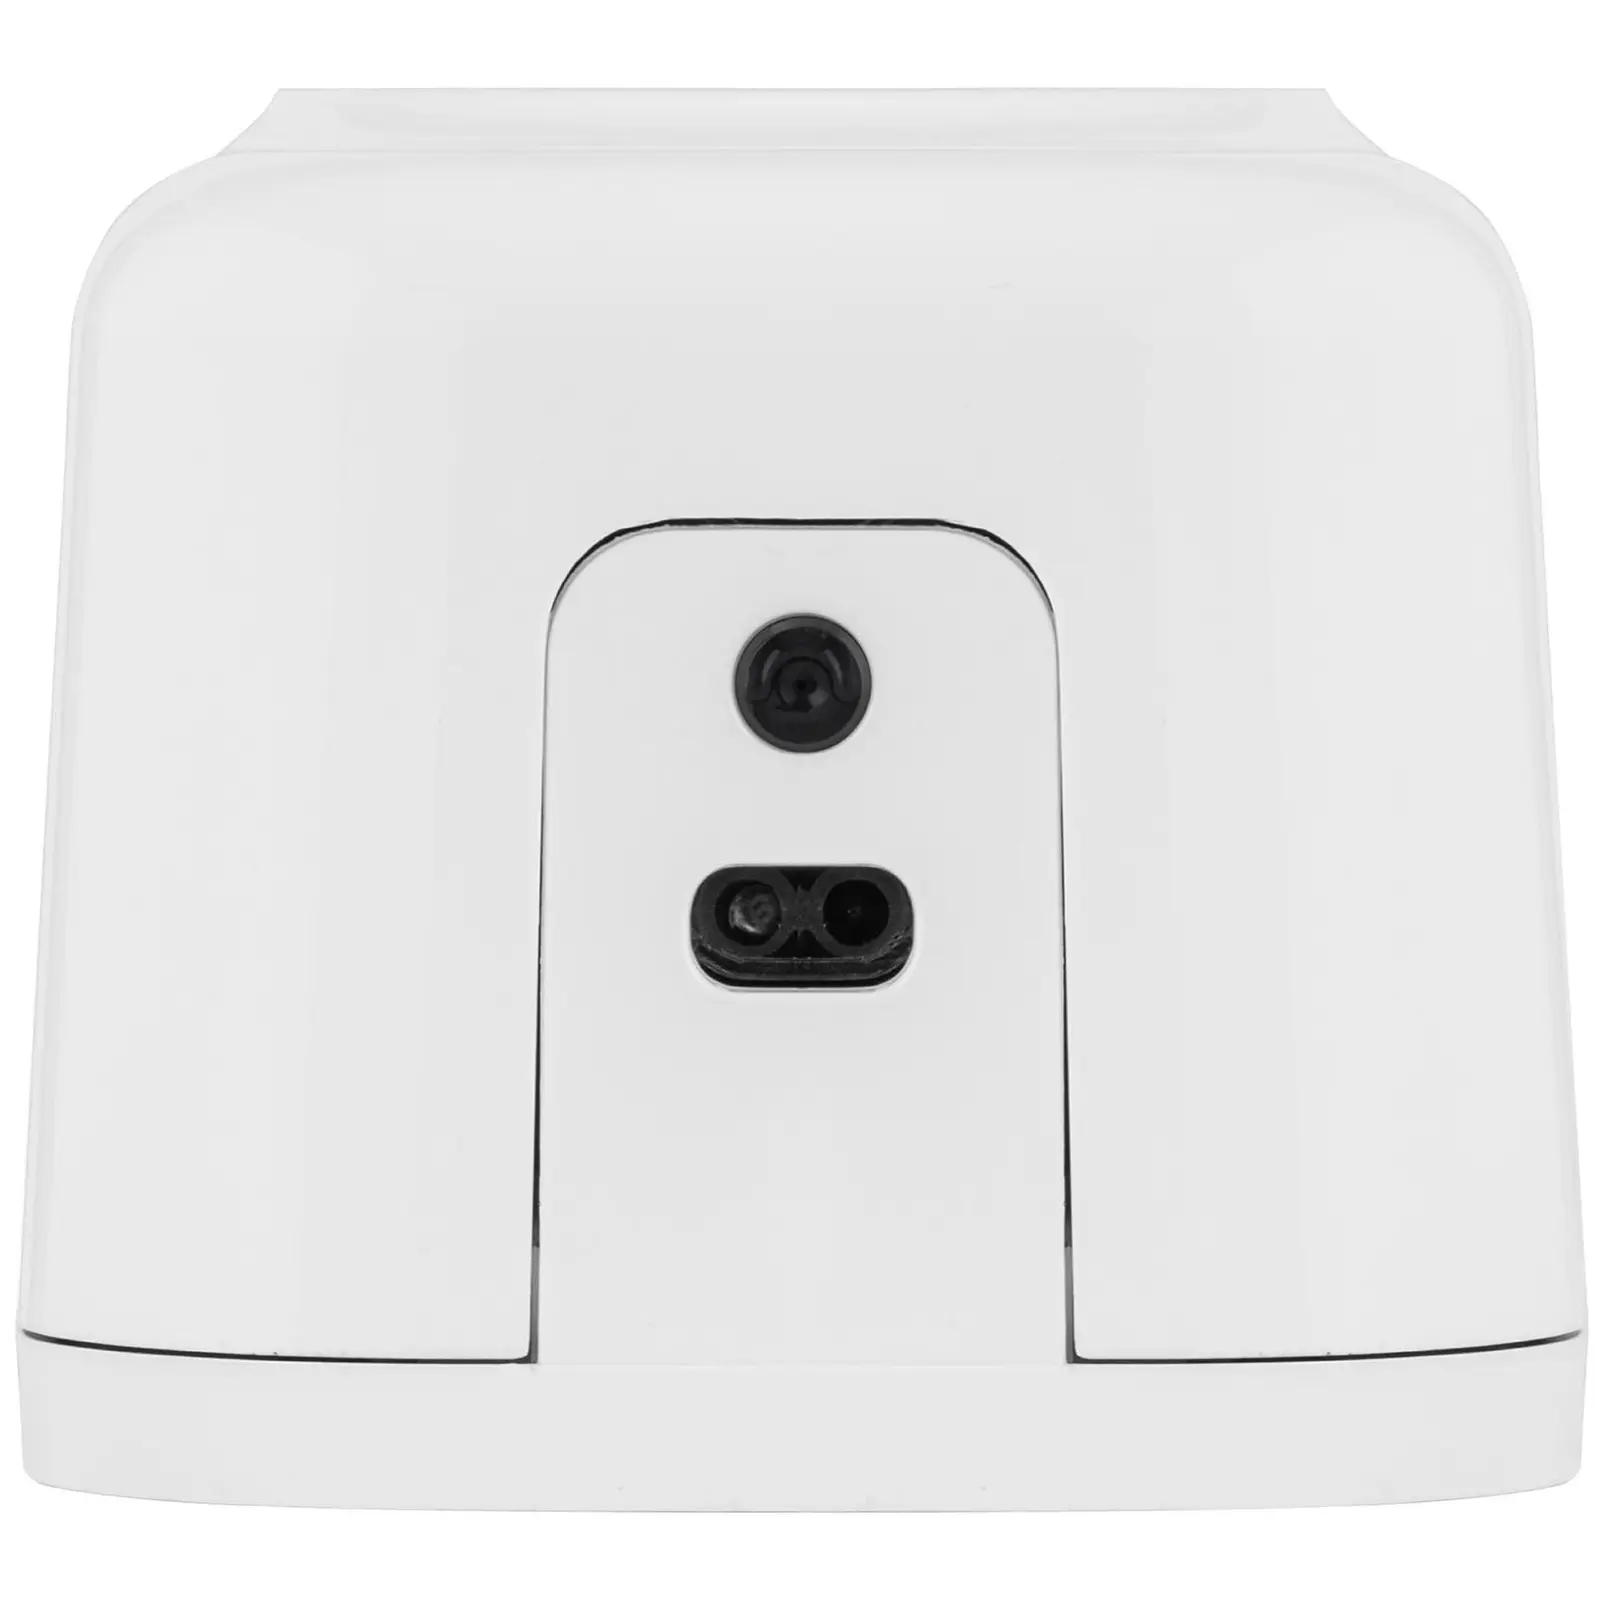 Automatic Soap Dispenser - for disinfectant - 1 L - wall-mounted - lockable - white